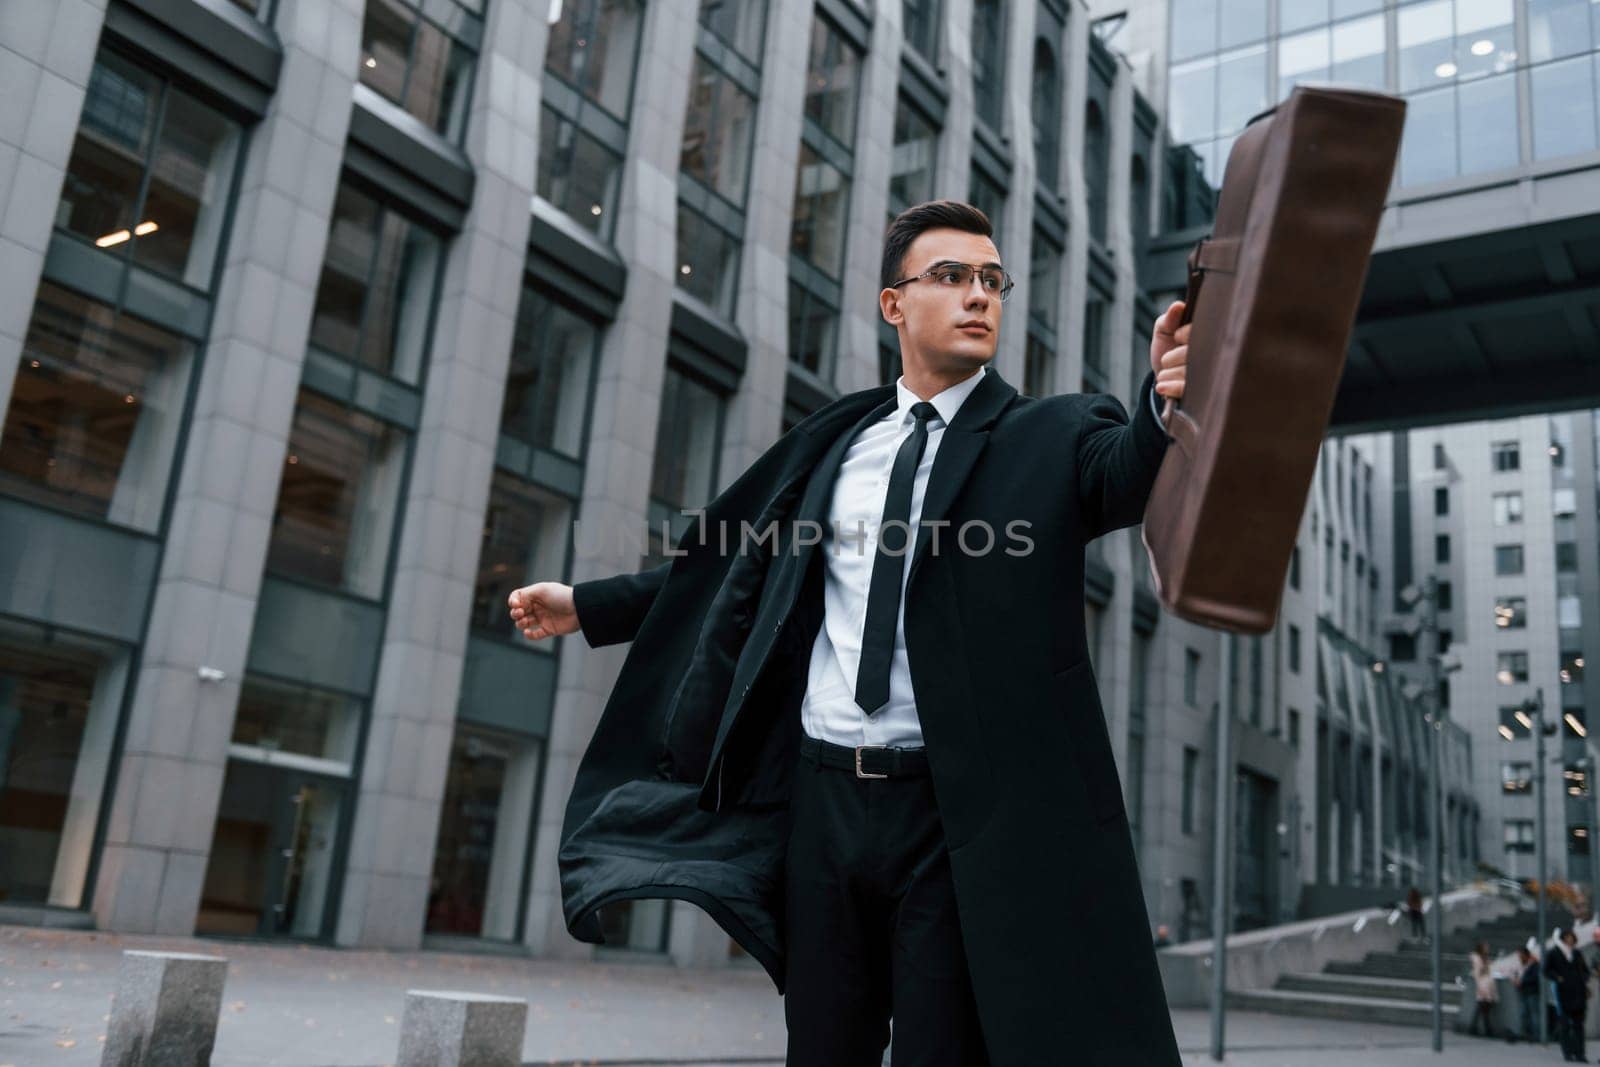 Grey building behind. Businessman in black suit and tie is outdoors in the city by Standret